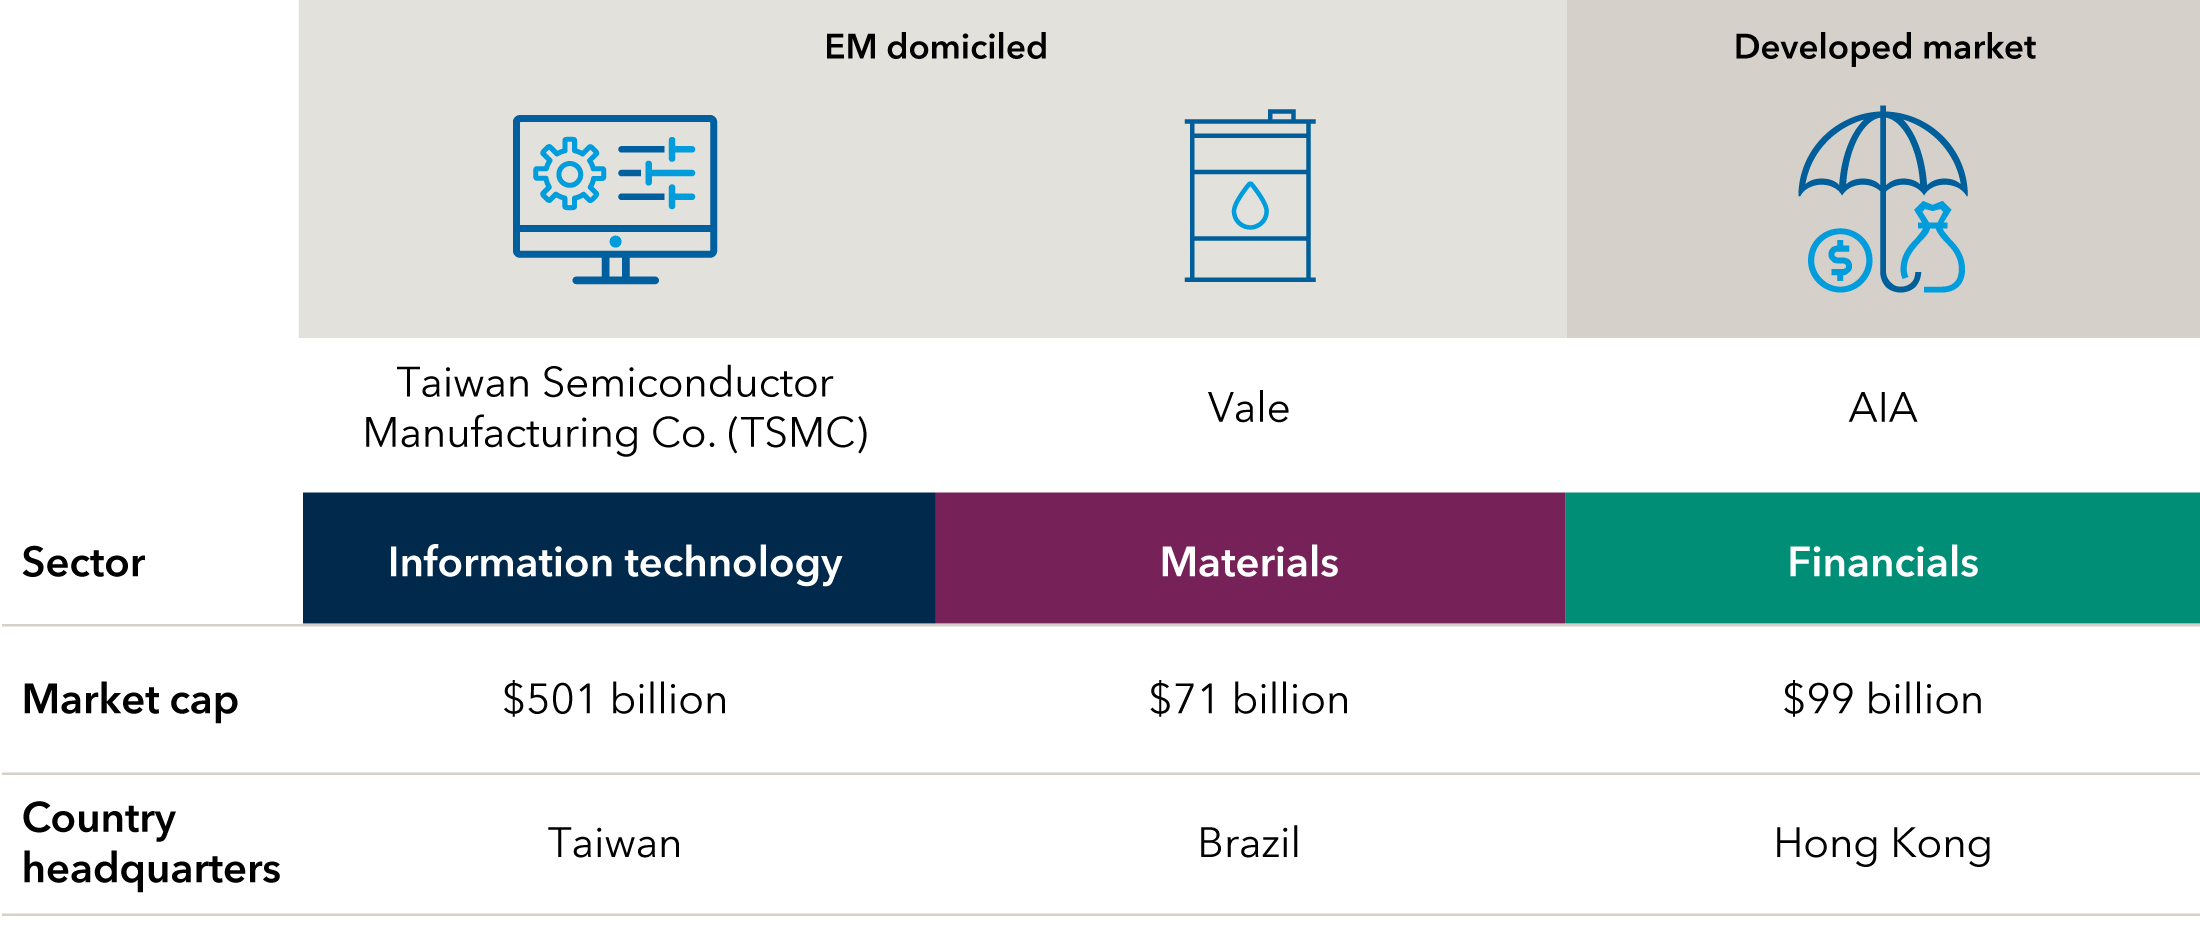 Companies shown are among the top 20 holdings by weight in New World Fund. Example 1: EM-domiciled: Taiwan Semiconductor Manufacturing Co. (TSMC) - Sector: Information technology; Market cap: $501 billion; Country headquarters: Taiwan. Example 2: EM-domiciled: Vale - Sector: materials; Market cap: $71 billion; Country headquarters: Brazil. Example 3: Developed market: AIA - Sector: financials; Market cap: $99 billion; Country headquarters: Hong Kong